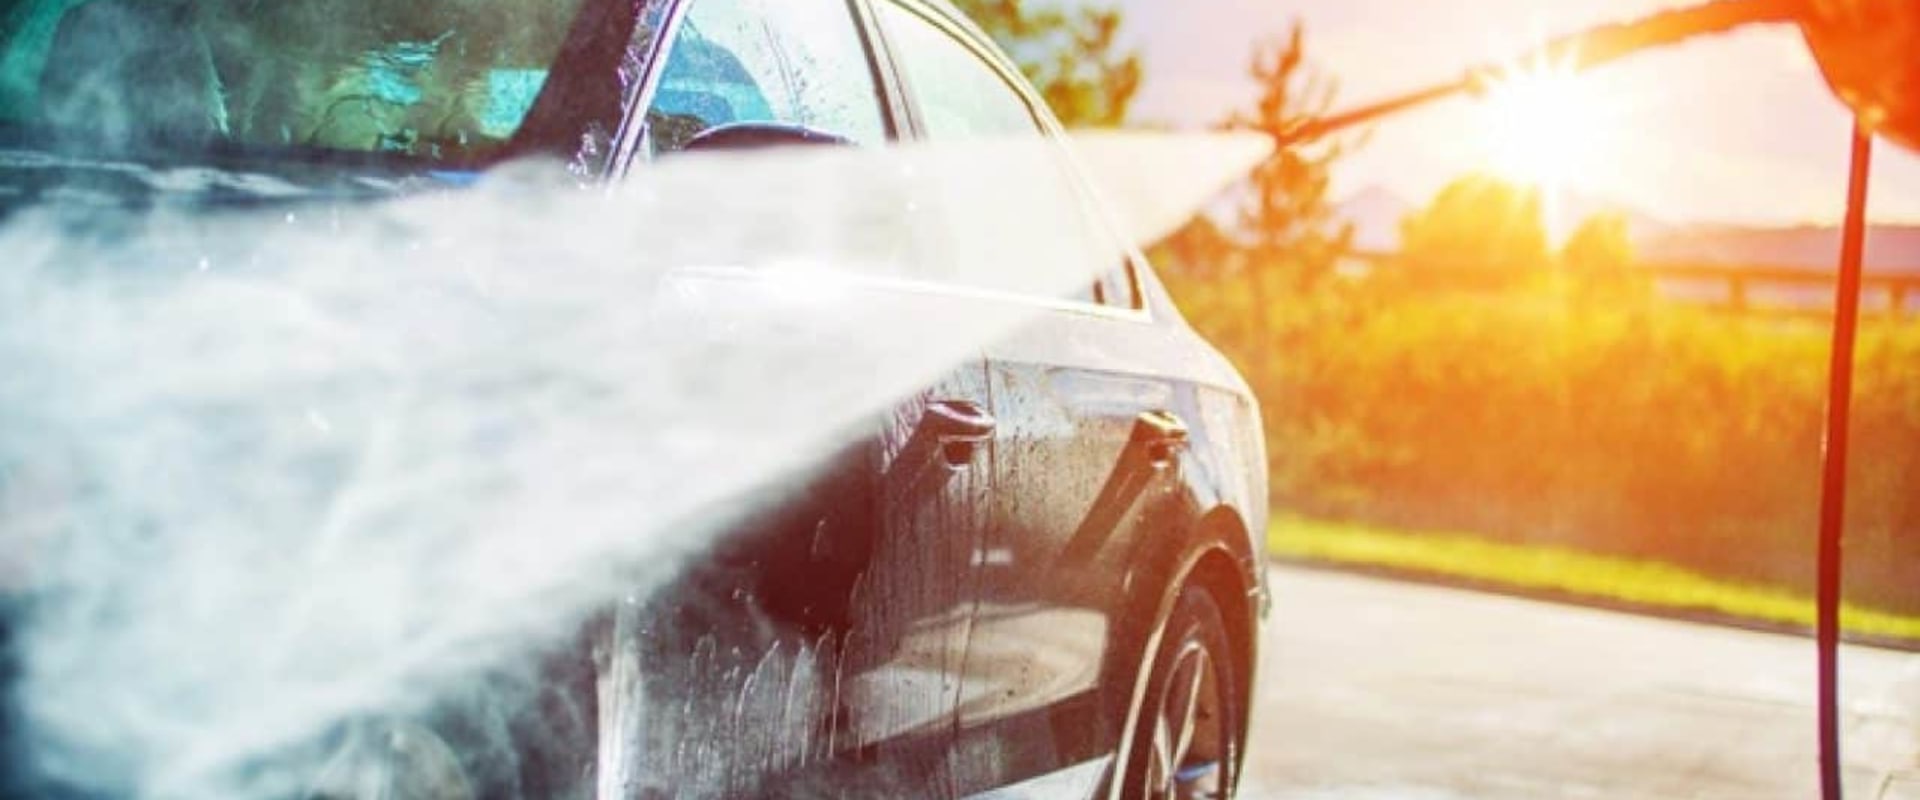 How do mobile car washes get their customers?